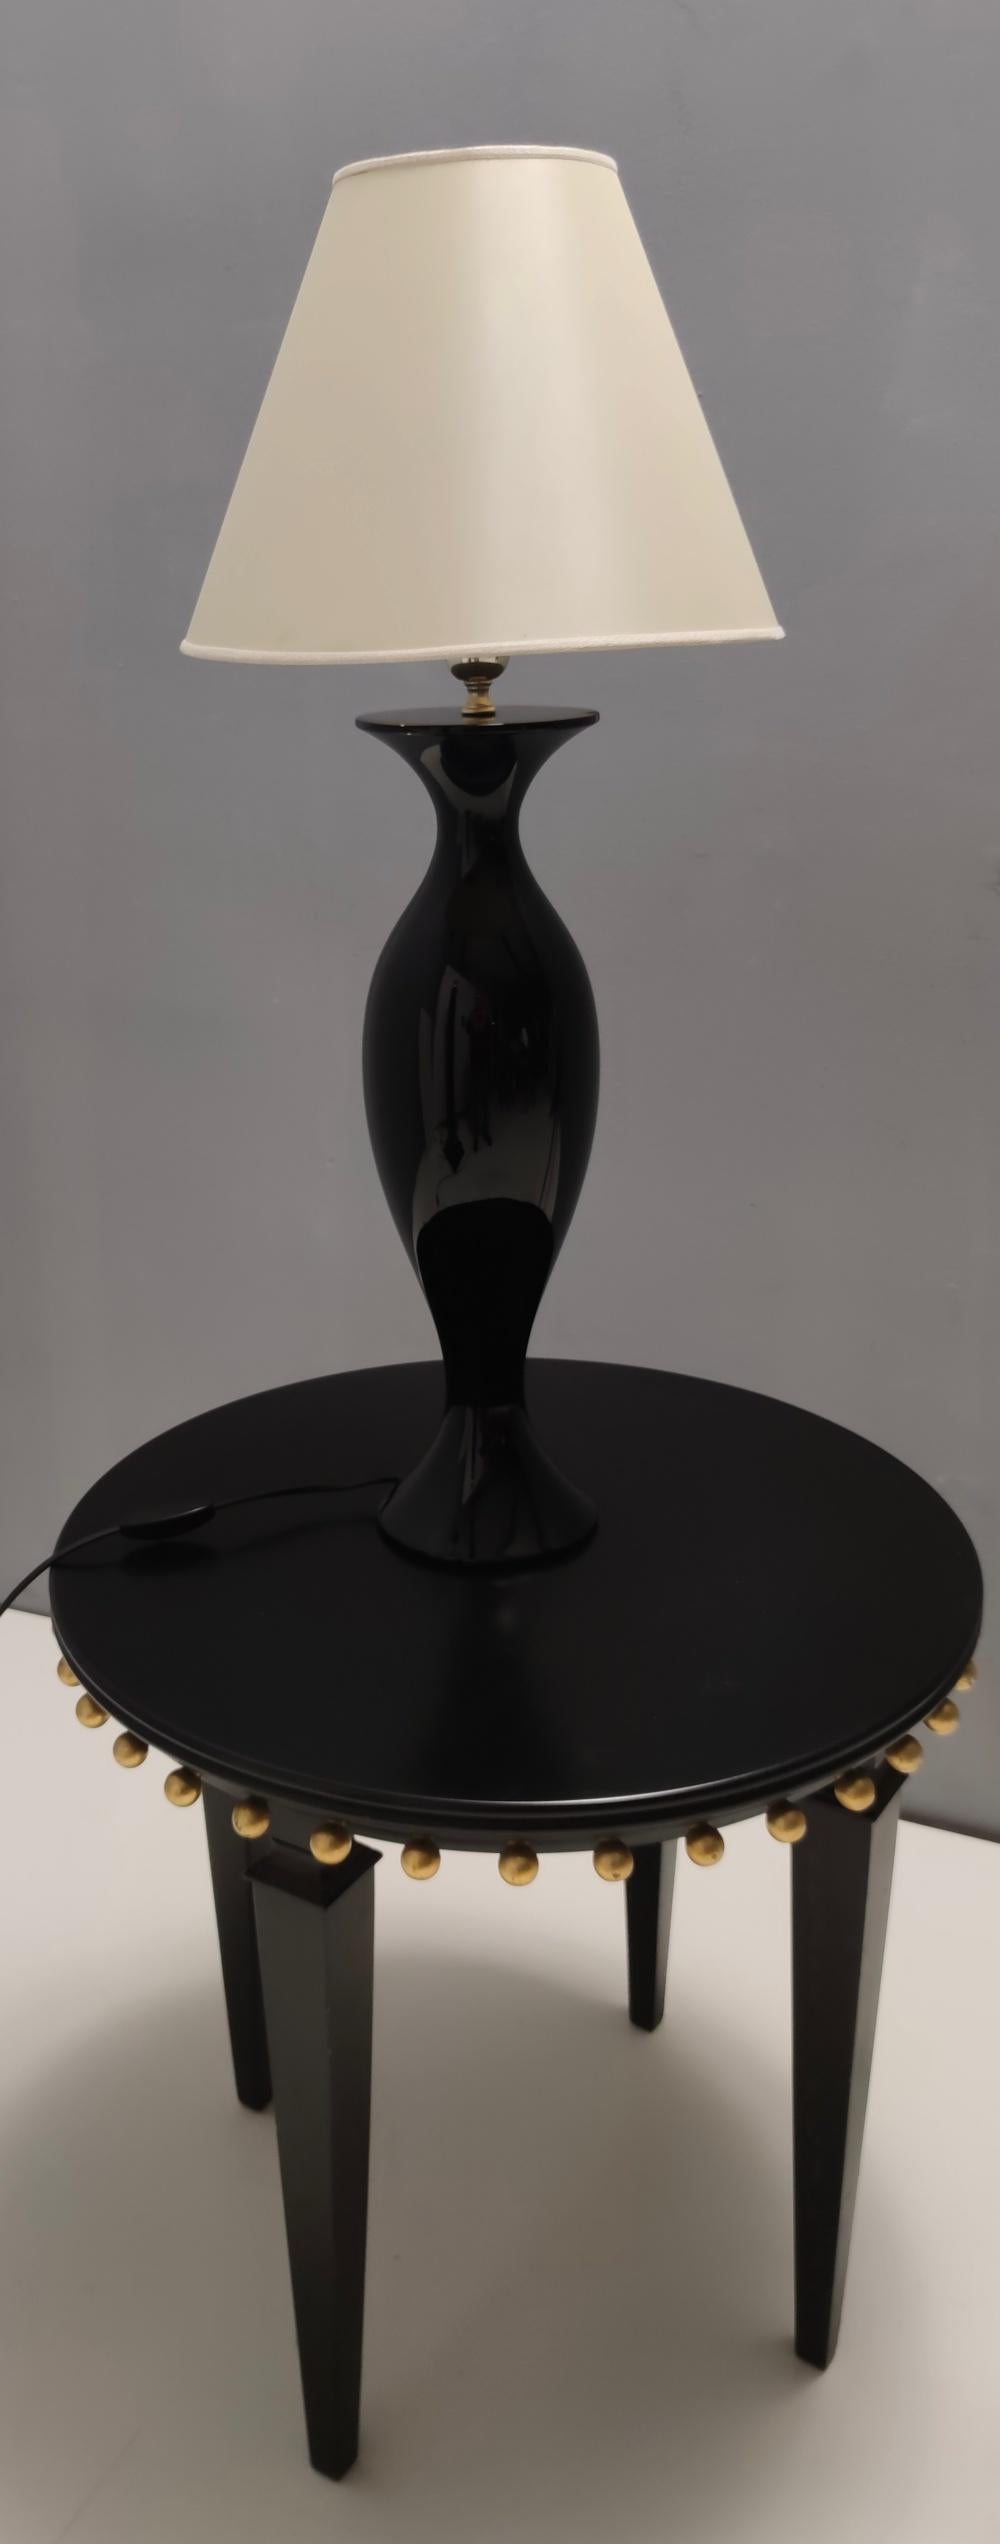 Italian Black Lacquered Beech Table Lamp with White Lampshade by Roberto Ventura, Italy